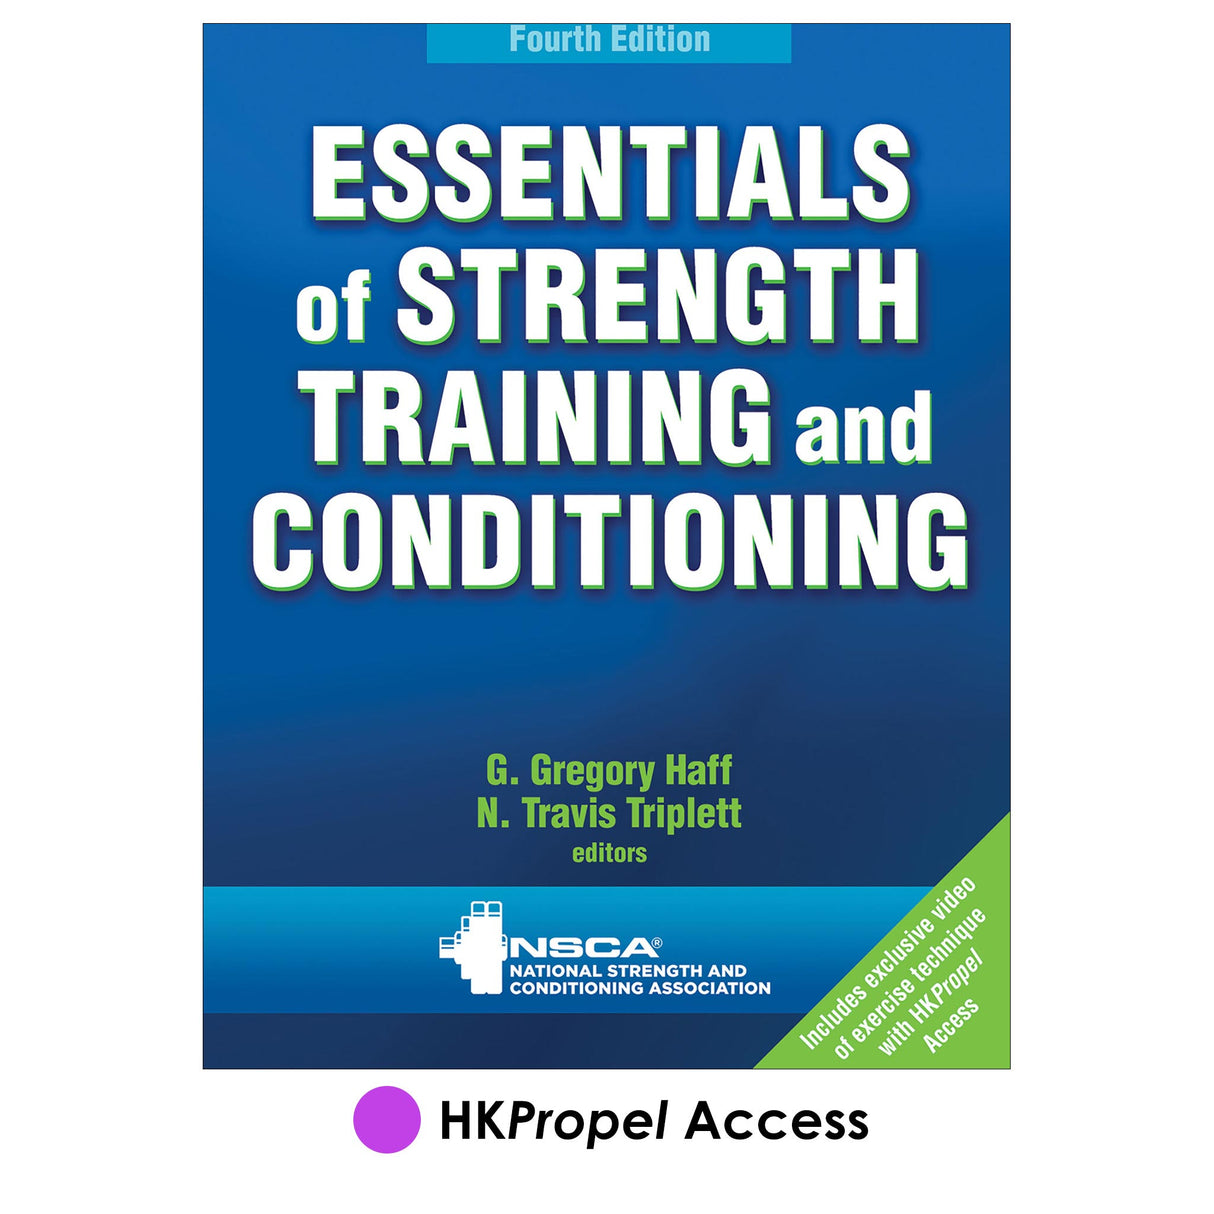 Essentials of Strength Training and Conditioning 4th Edition HKPropel Access